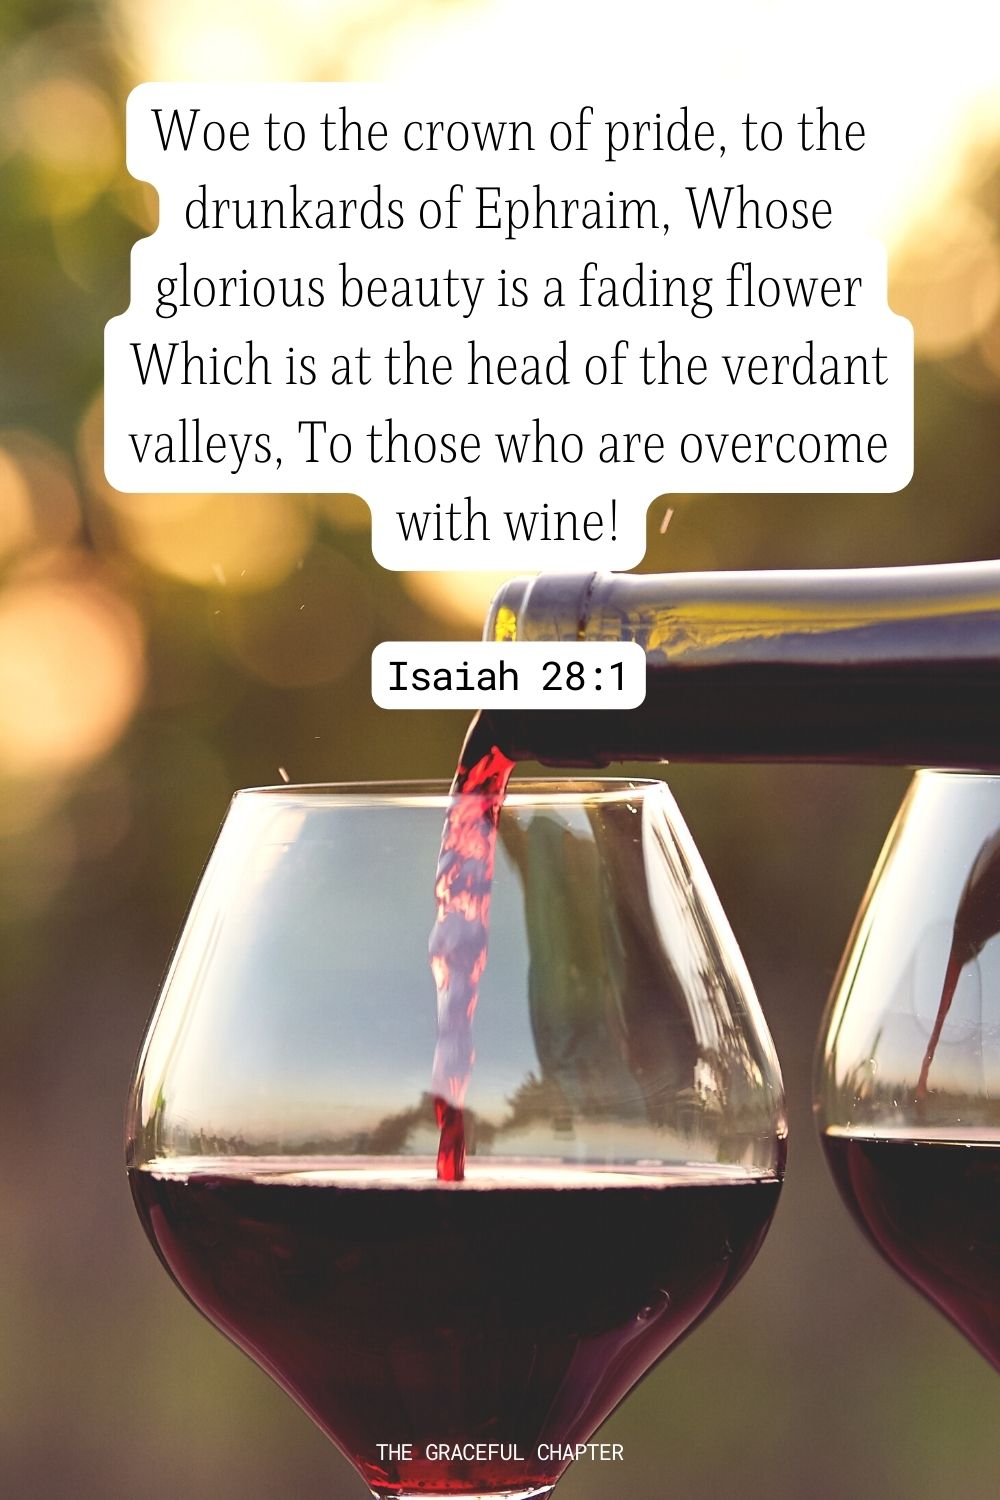 Woe to the crown of pride, to the drunkards of Ephraim, Whose glorious beauty is a fading flower Which is at the head of the verdant valleys, To those who are overcome with wine! Isaiah 28:1